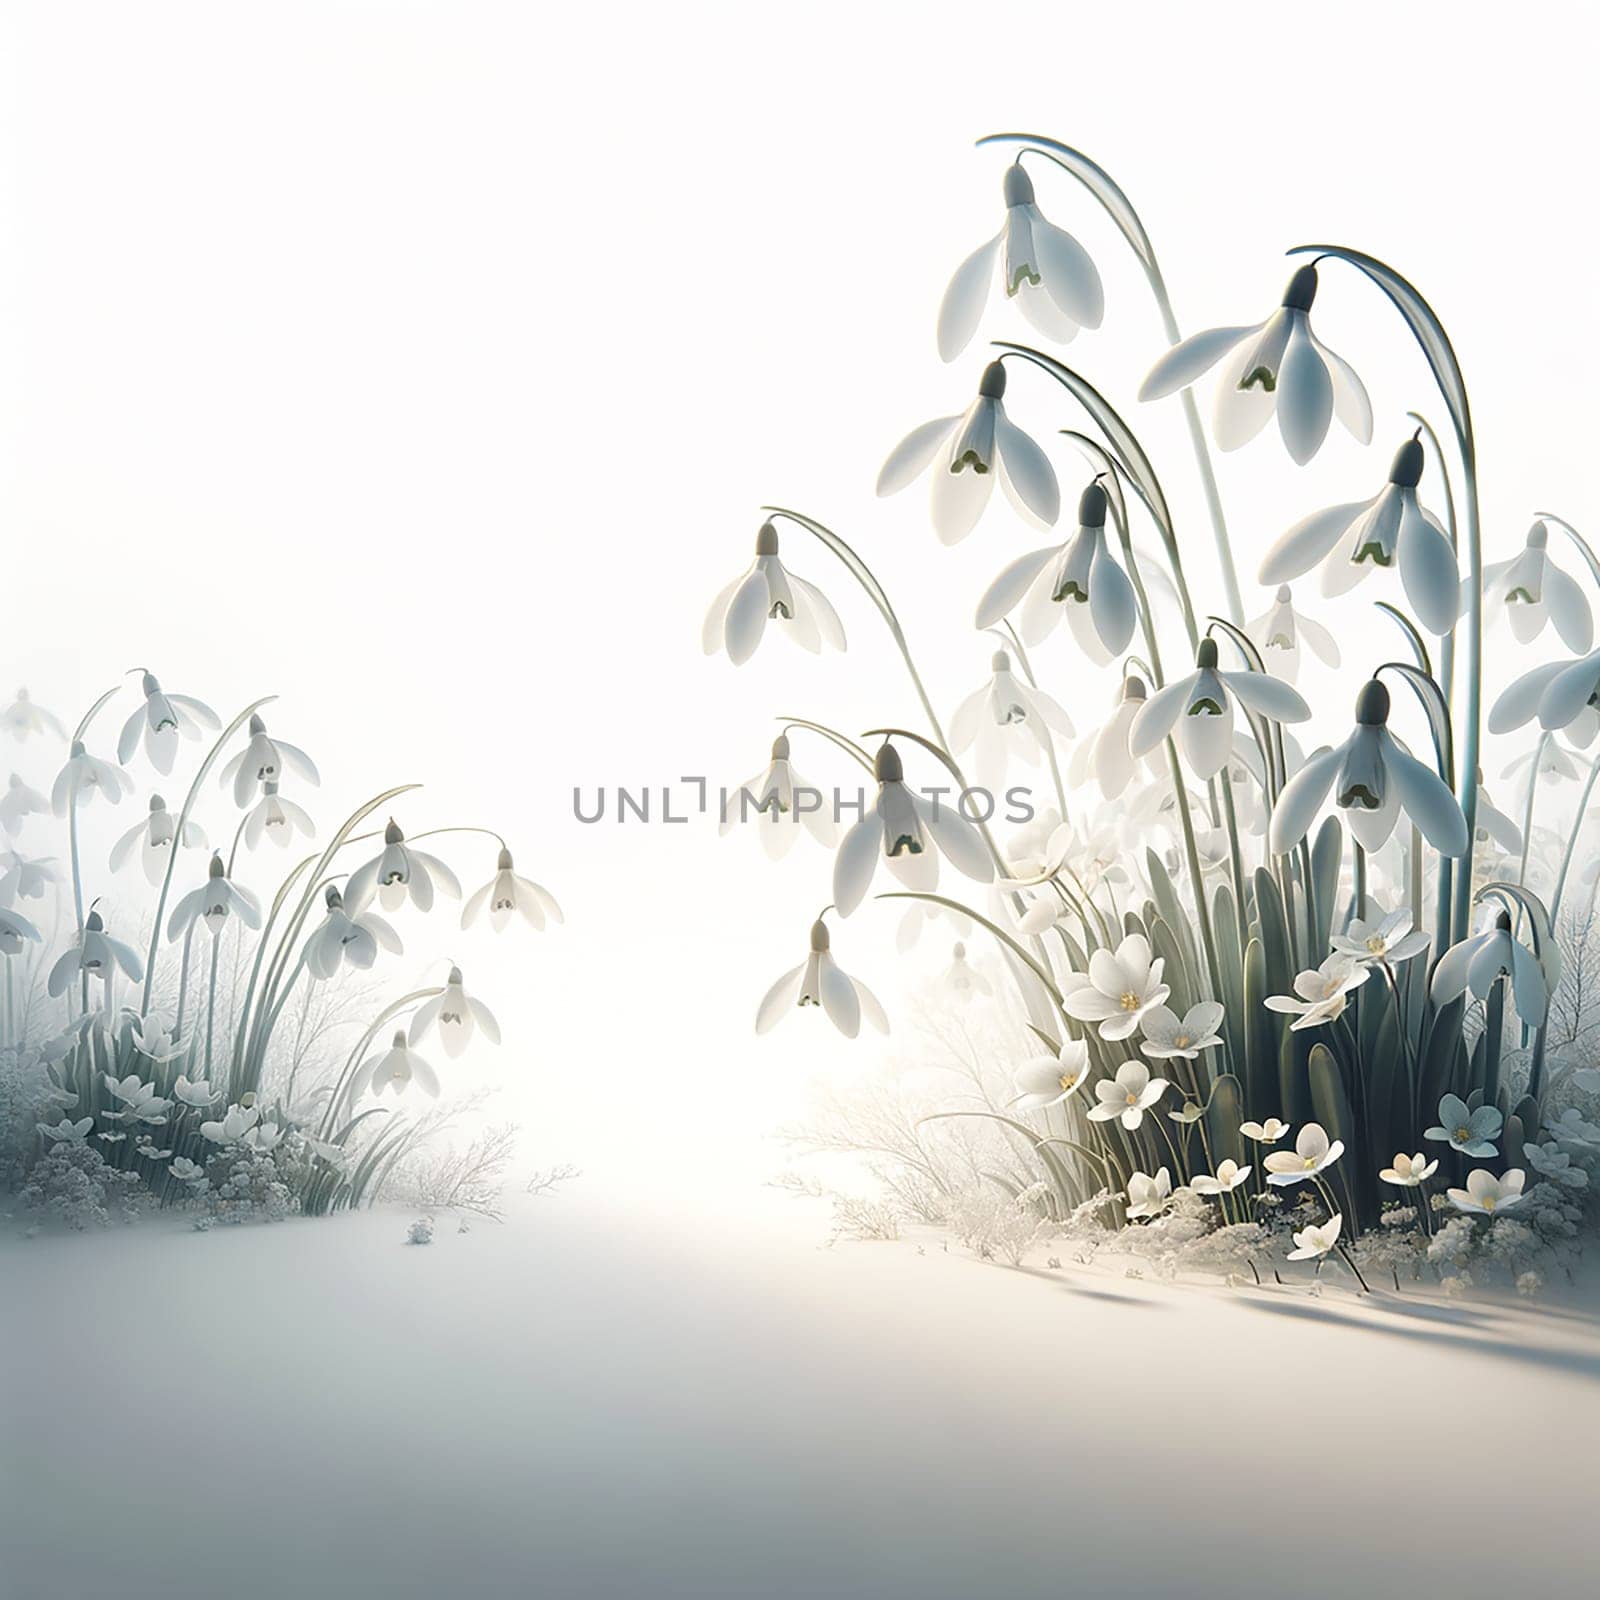 Greeting Spring: Tranquil Snowdrops Blossom on White Background by Petrichor